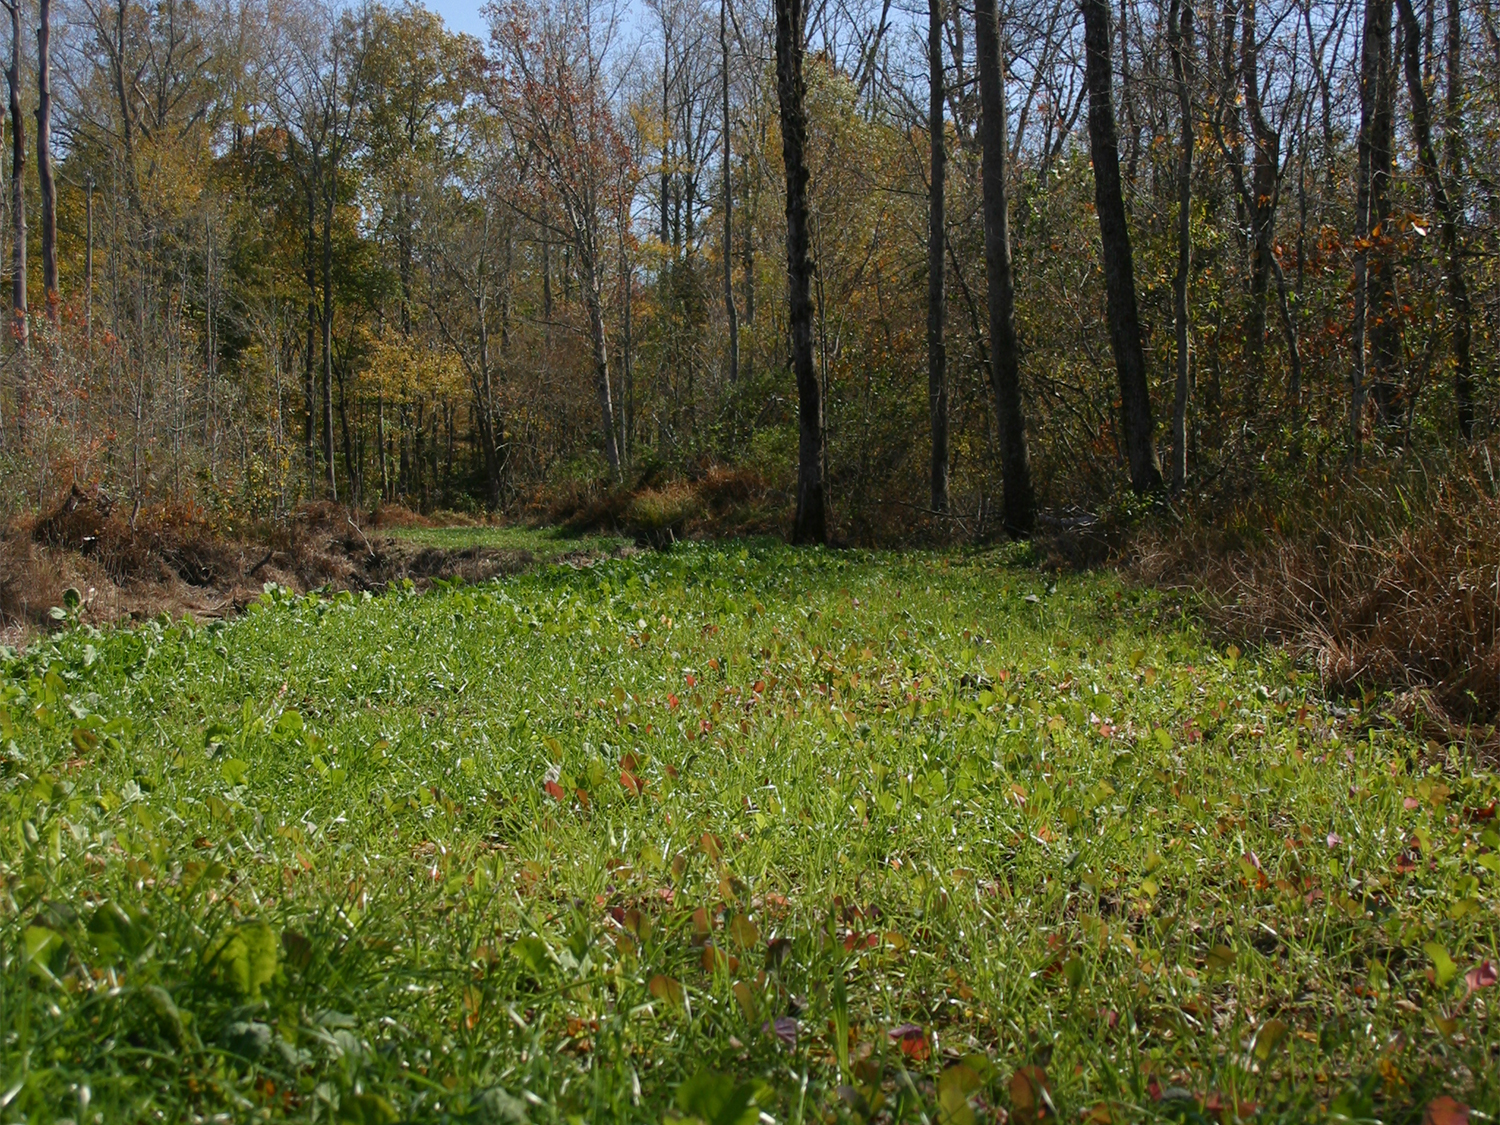 A narrow, long food plot that stretches near a tree line.